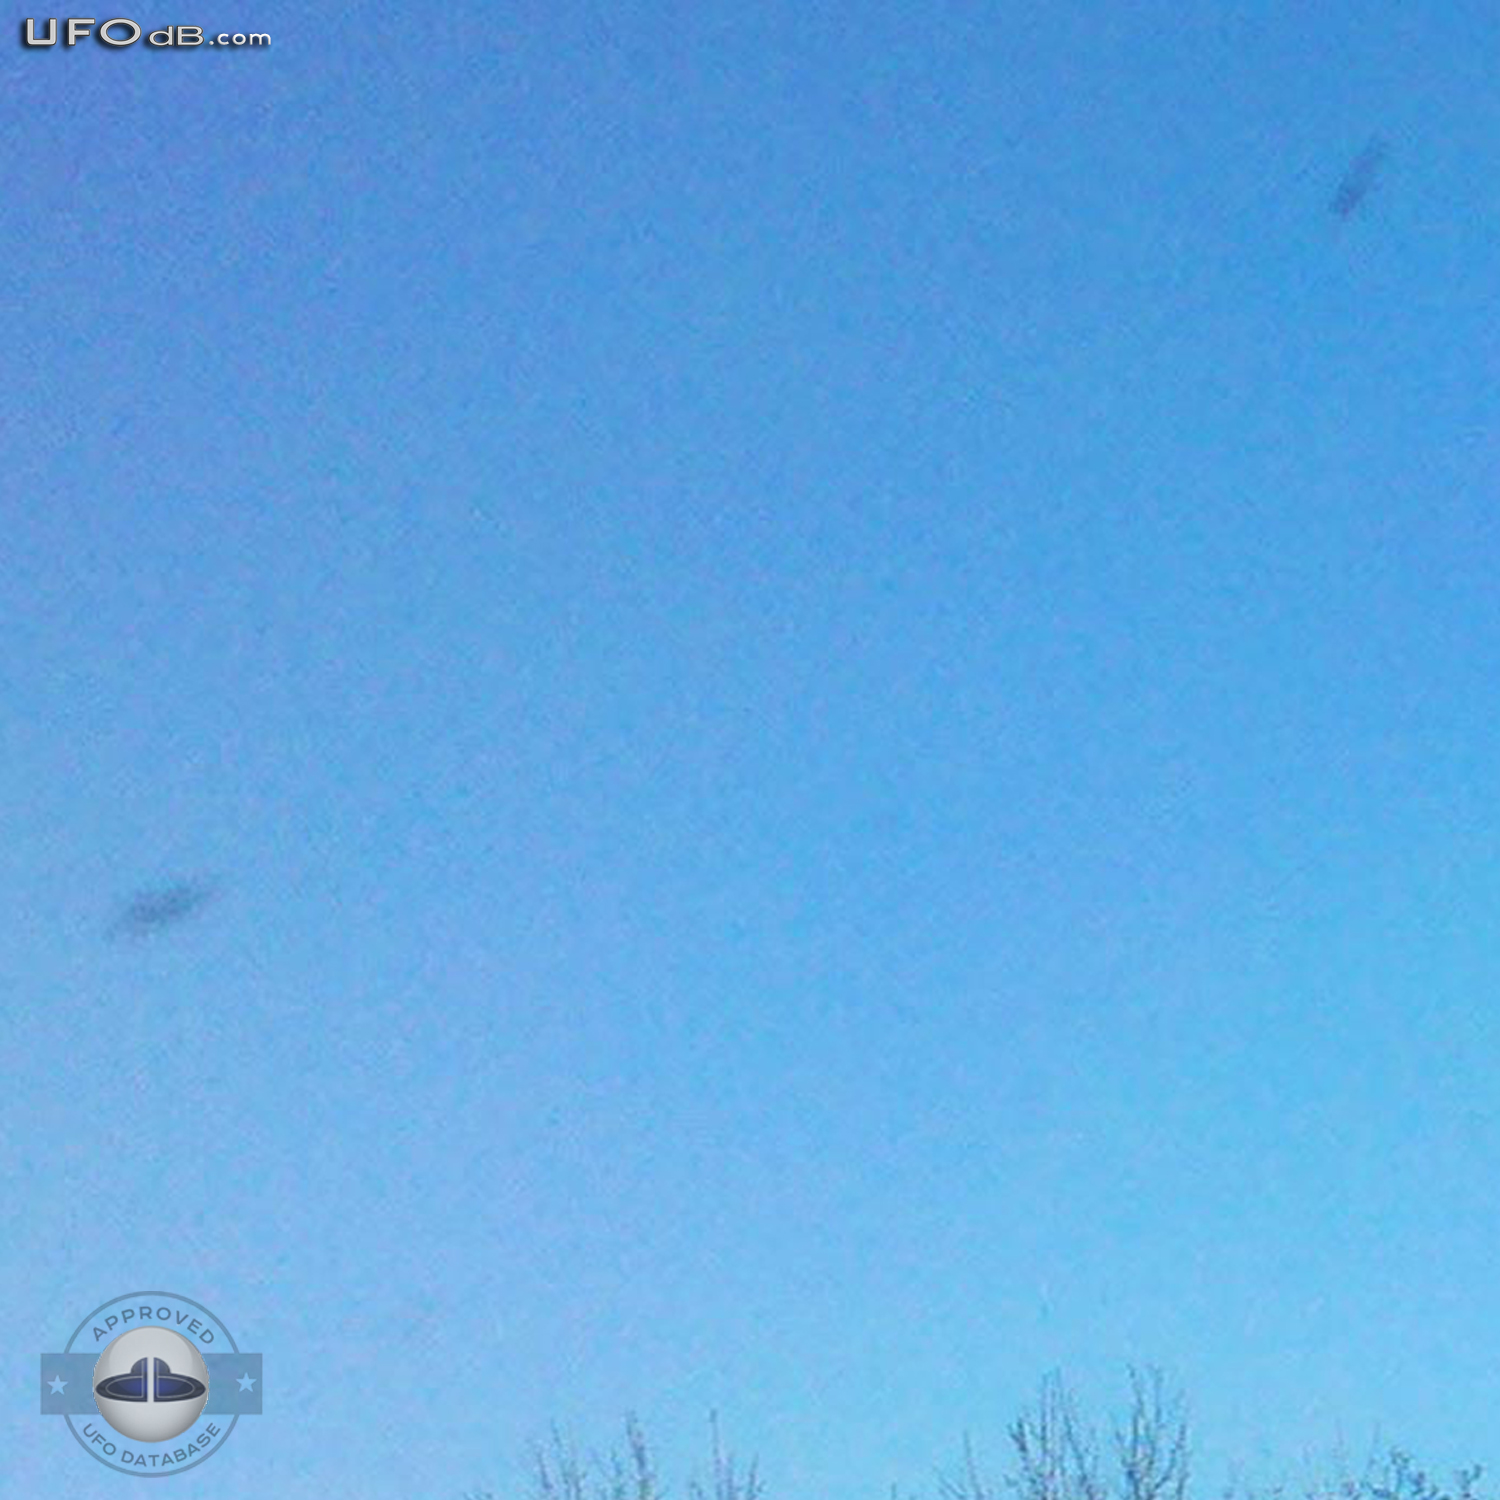 Picture shot from car captures two UFOs in Tempe, Arizona | April 2011 UFO Picture #249-4